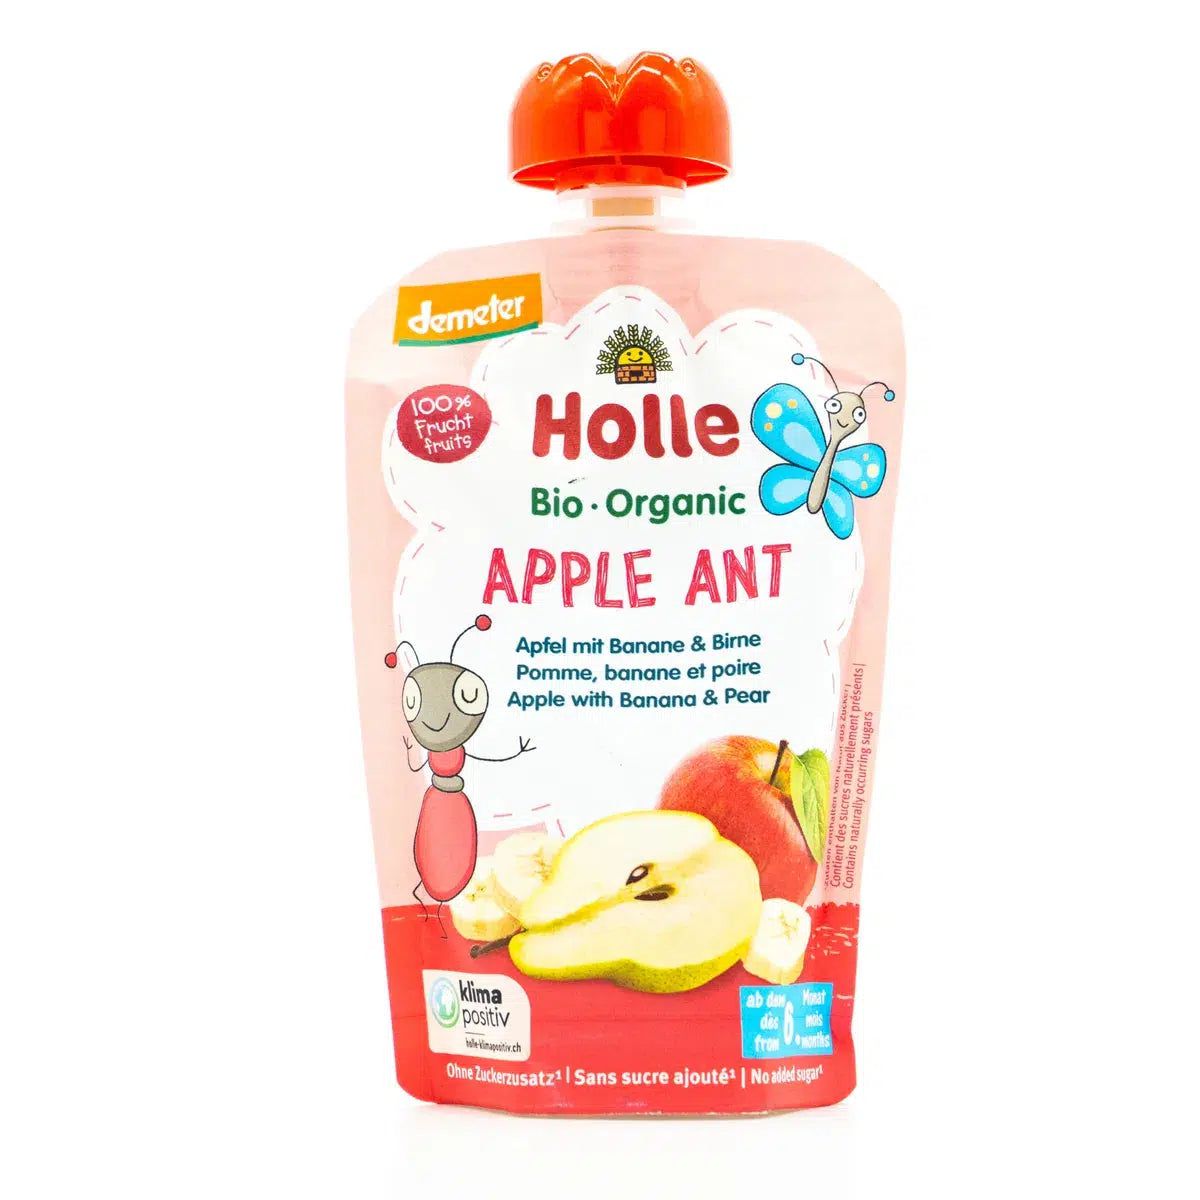 Holle Apple Ant: Apple, Banana & Pear (6+ months) - 12 Pouches